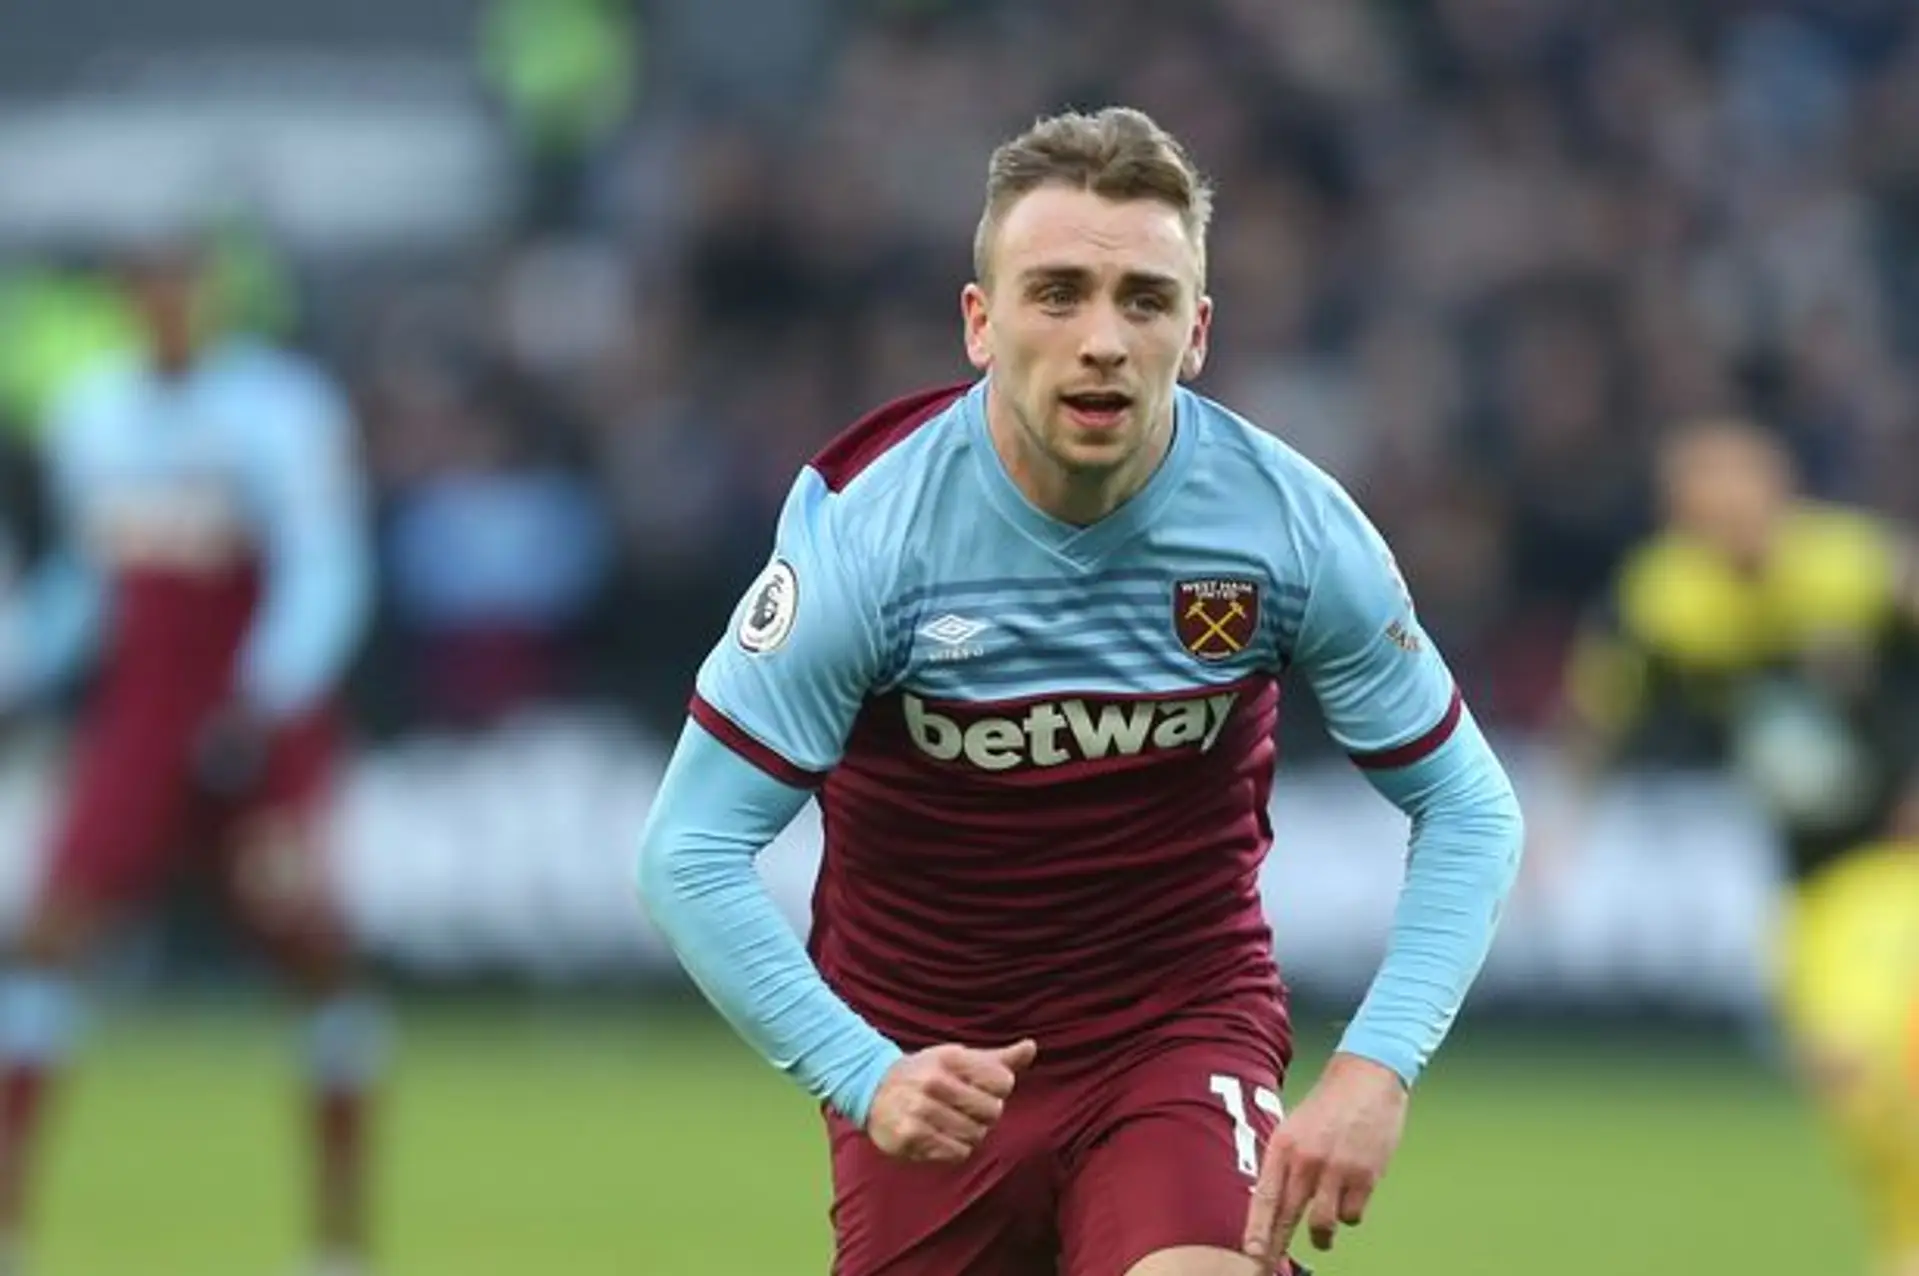 Why I think we should sign this odd West Ham player